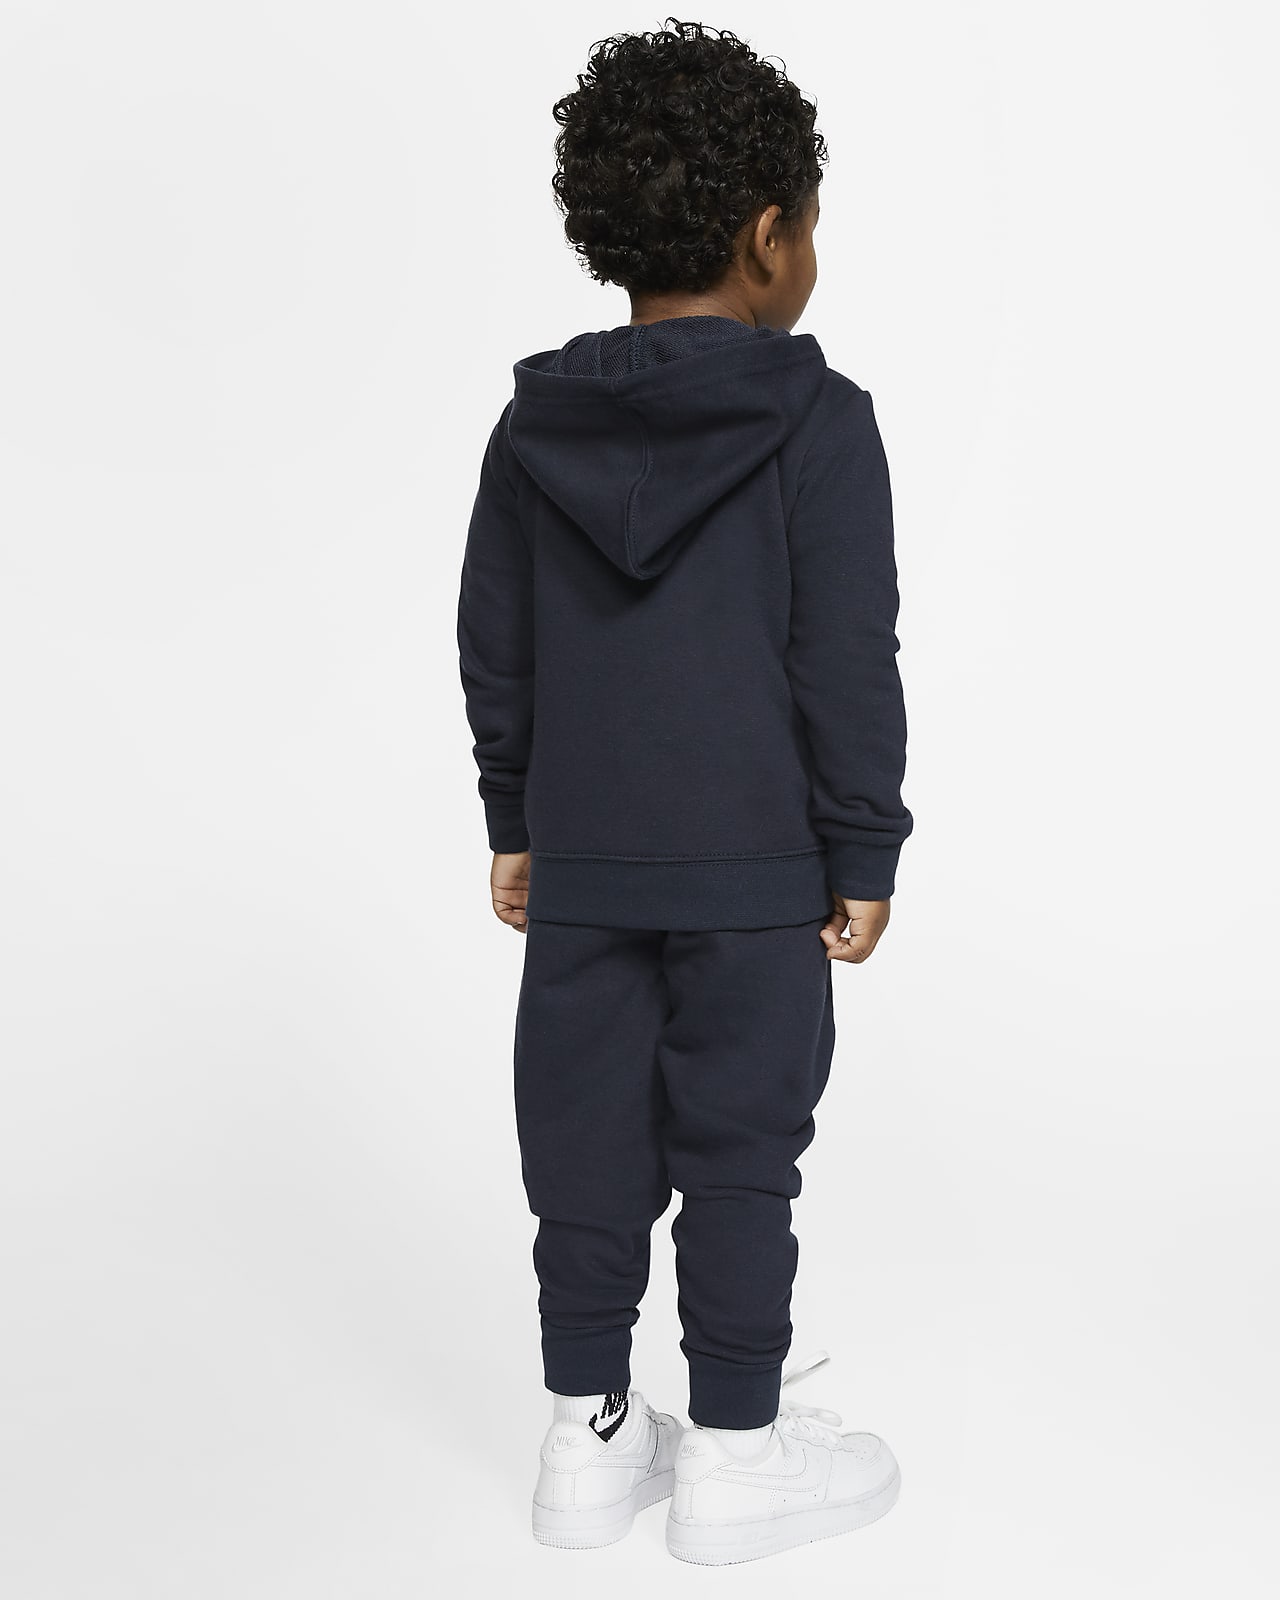 https://static.nike.com/a/images/t_PDP_1280_v1/f_auto,q_auto:eco/i1-e7b6a834-dbd7-4c86-879d-012a06fbeb4f/sportswear-toddler-hoodie-and-joggers-set-3dwGlx.png